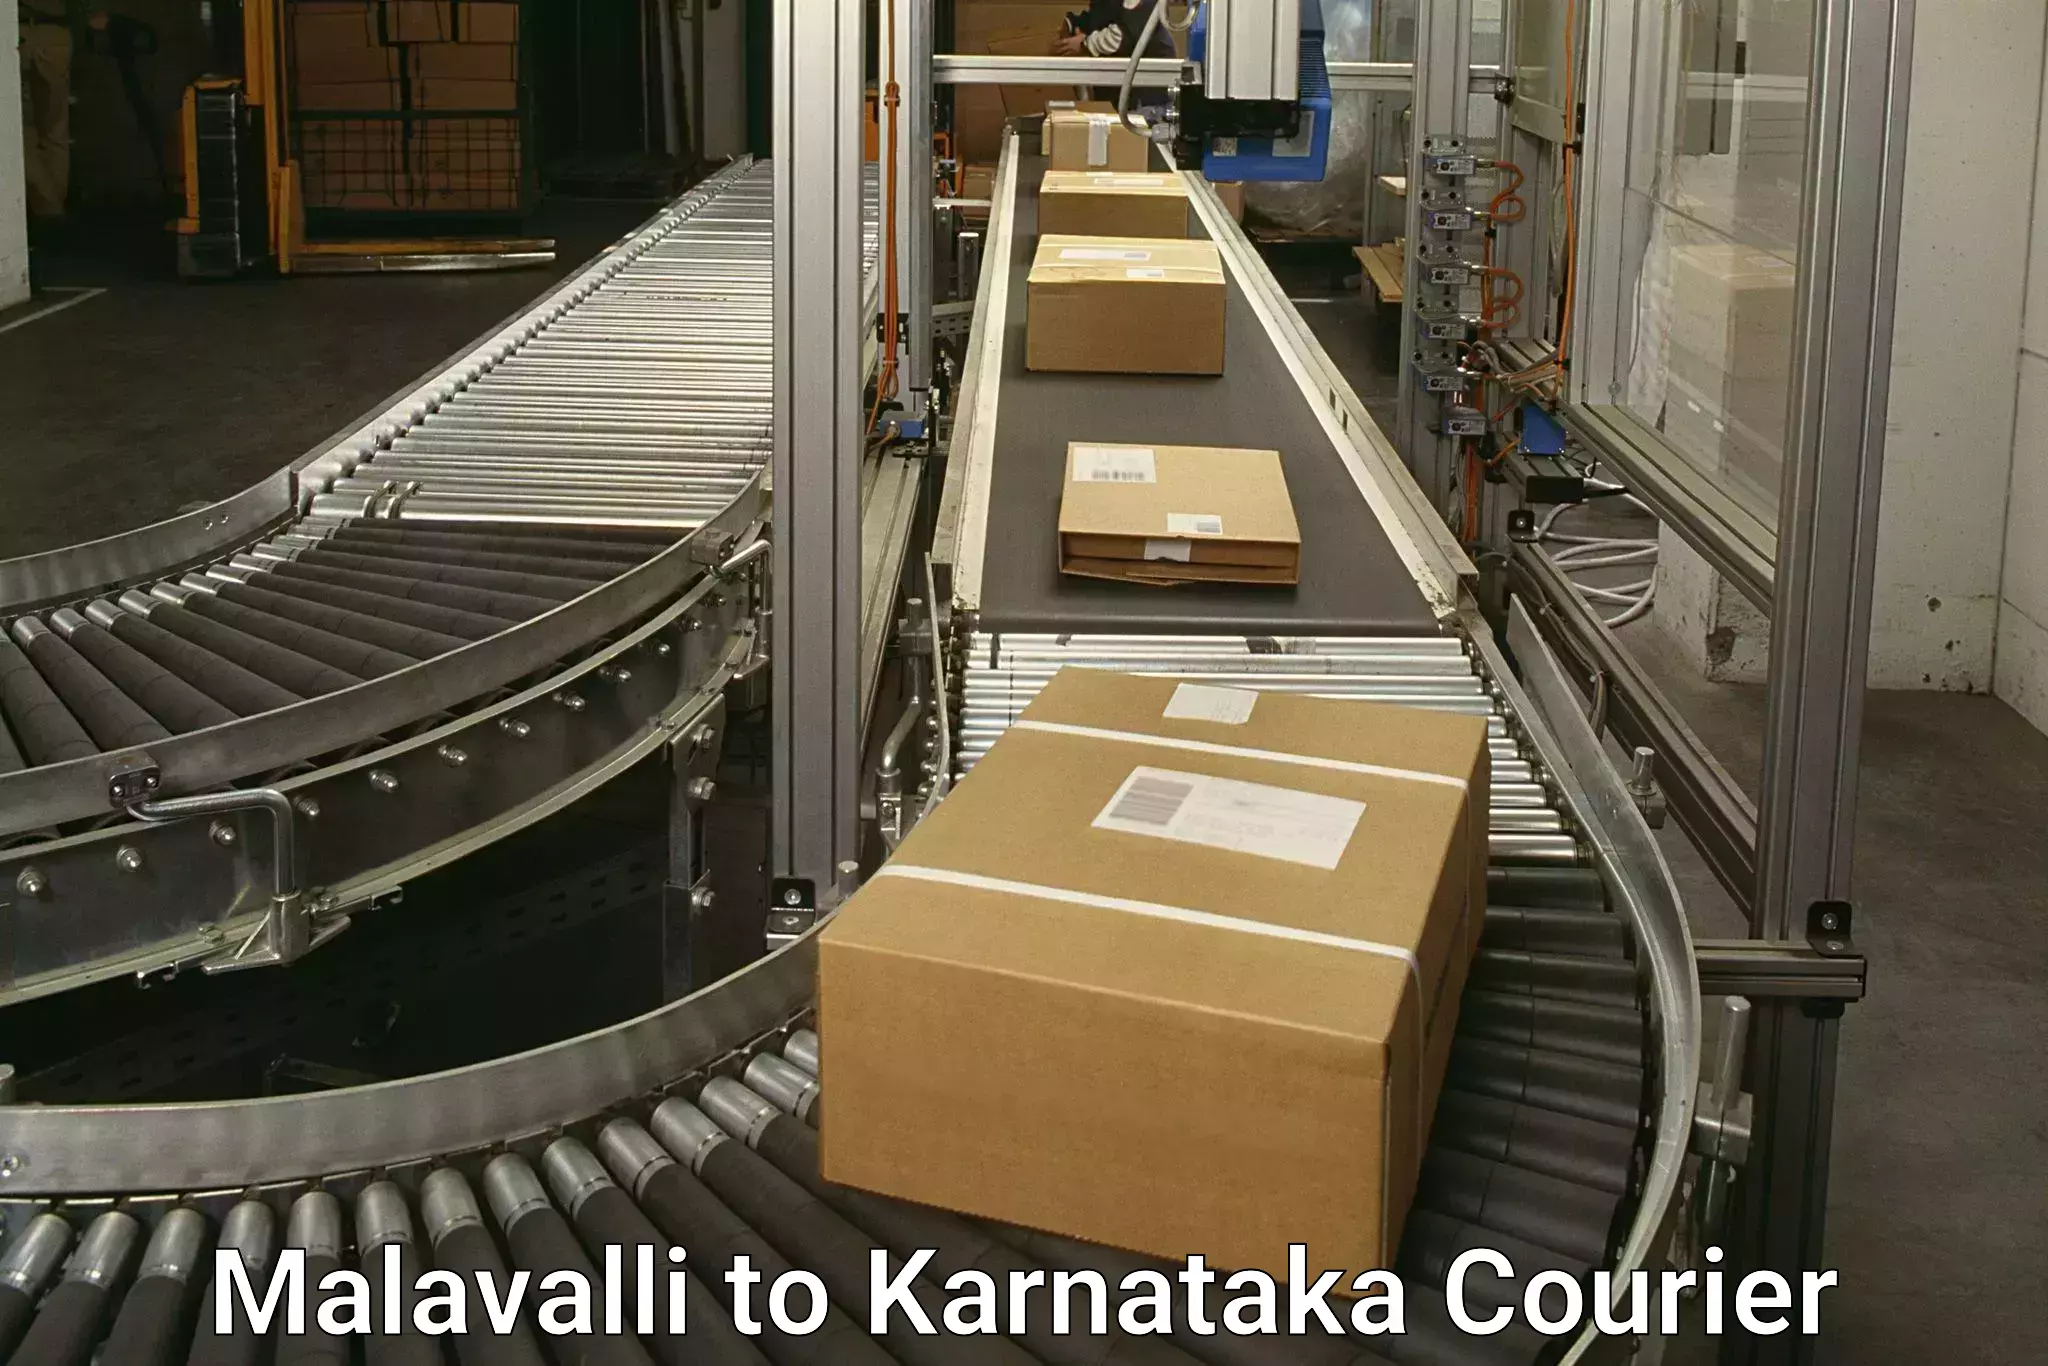 Global shipping networks Malavalli to Chittapur